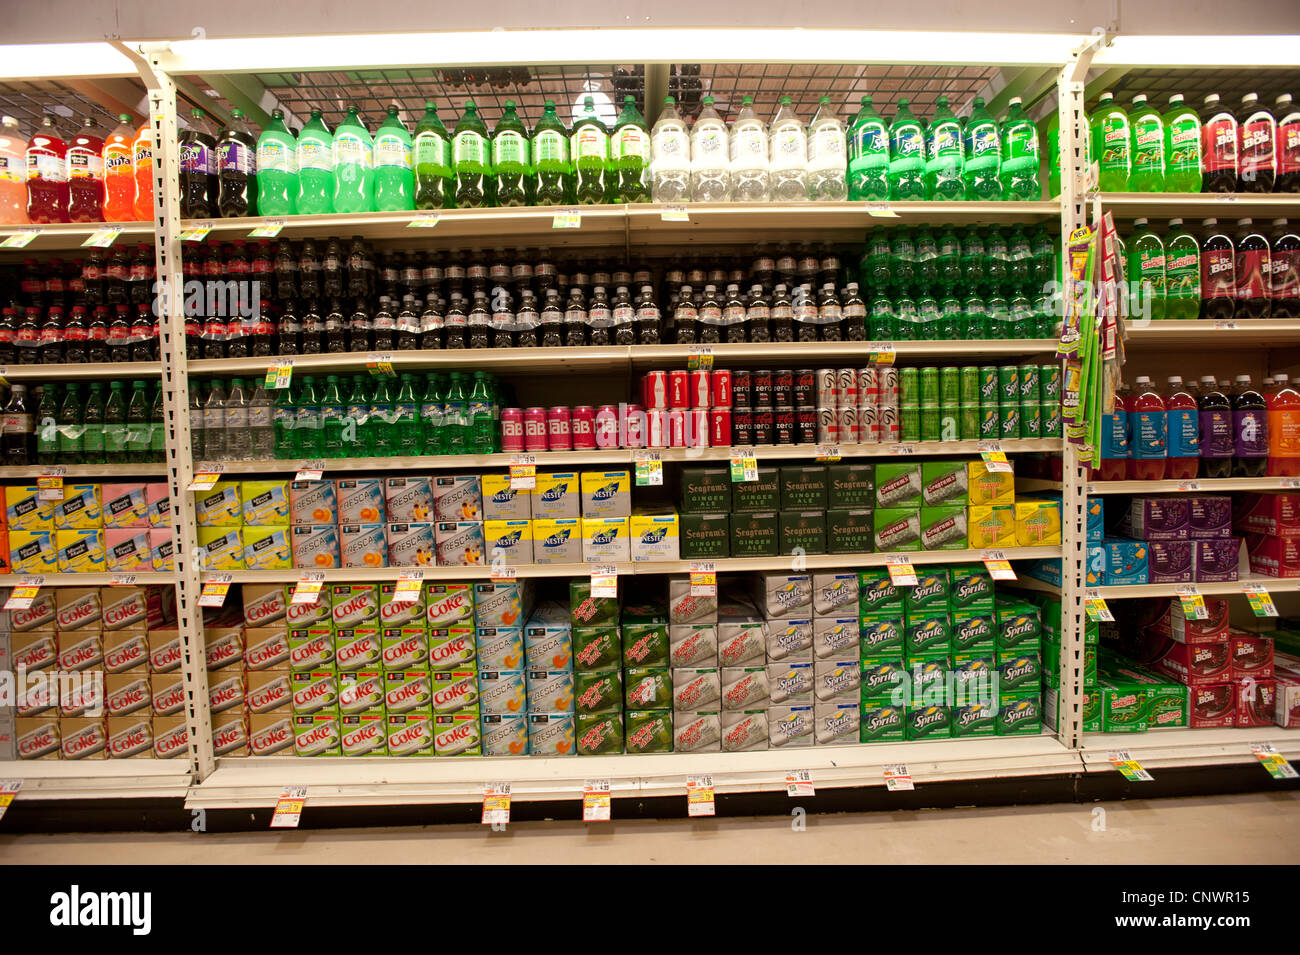 Soda isle in the grocery store Stock Photo